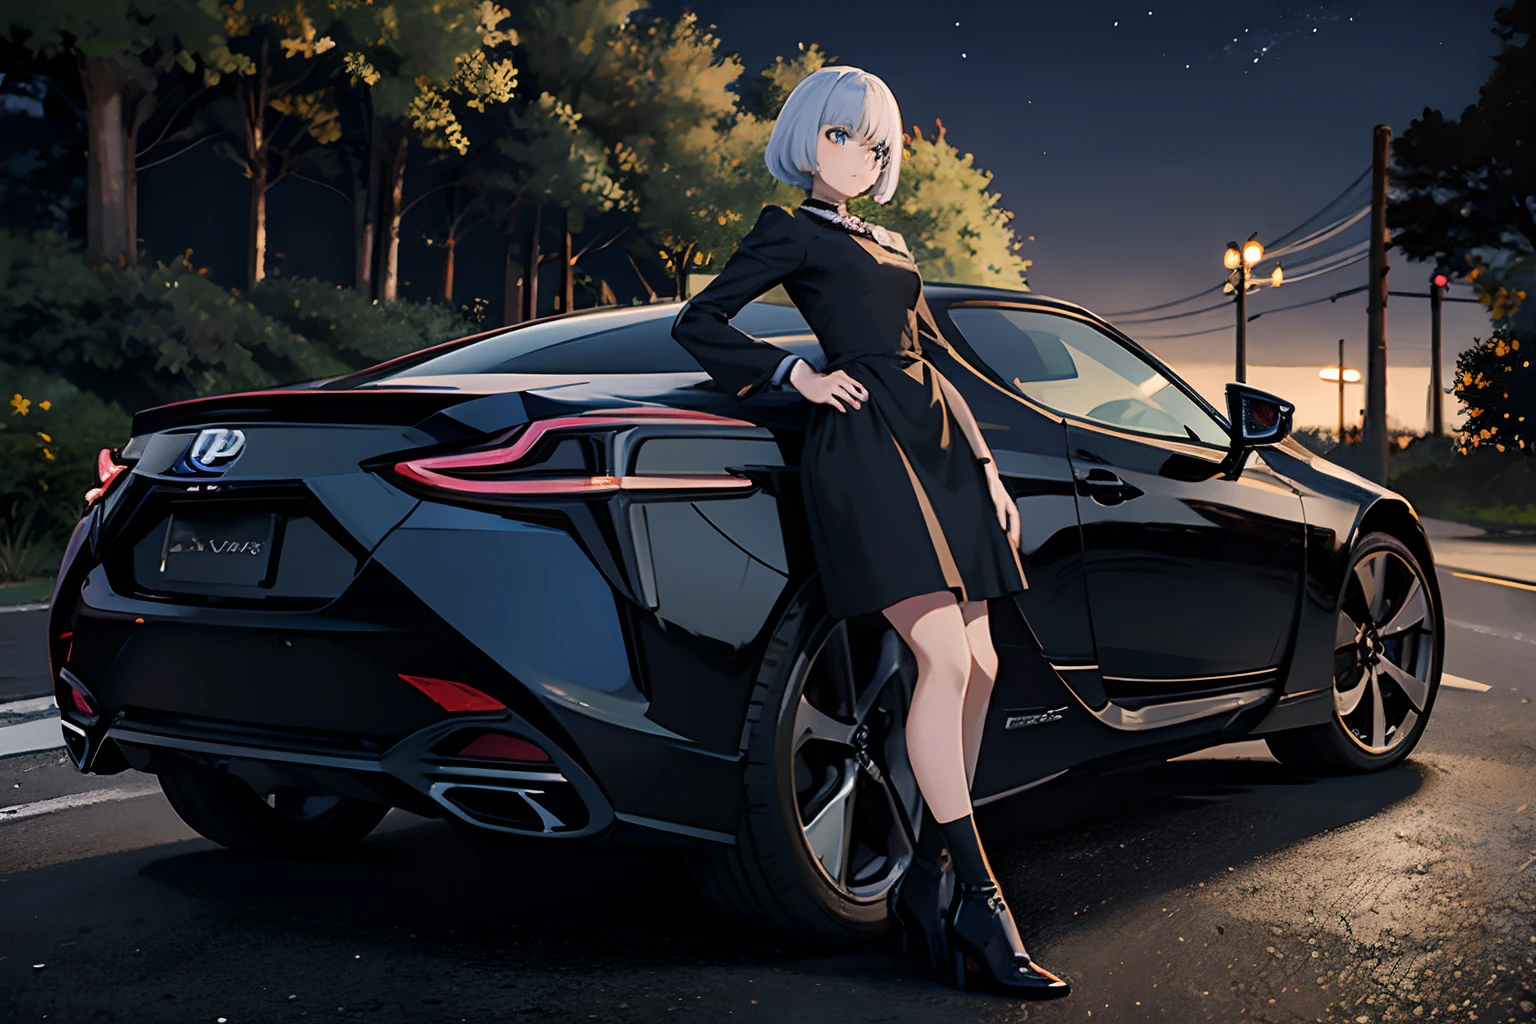 anime girl, anime girl with short legs wearing a black dress, anime girl leaning on side of Lexus LC, lexus LC, girl detailed face, under a streetlight, vending machine in background, at nighttime, forest in background, in a forest, trees, masterpiece, highest quality